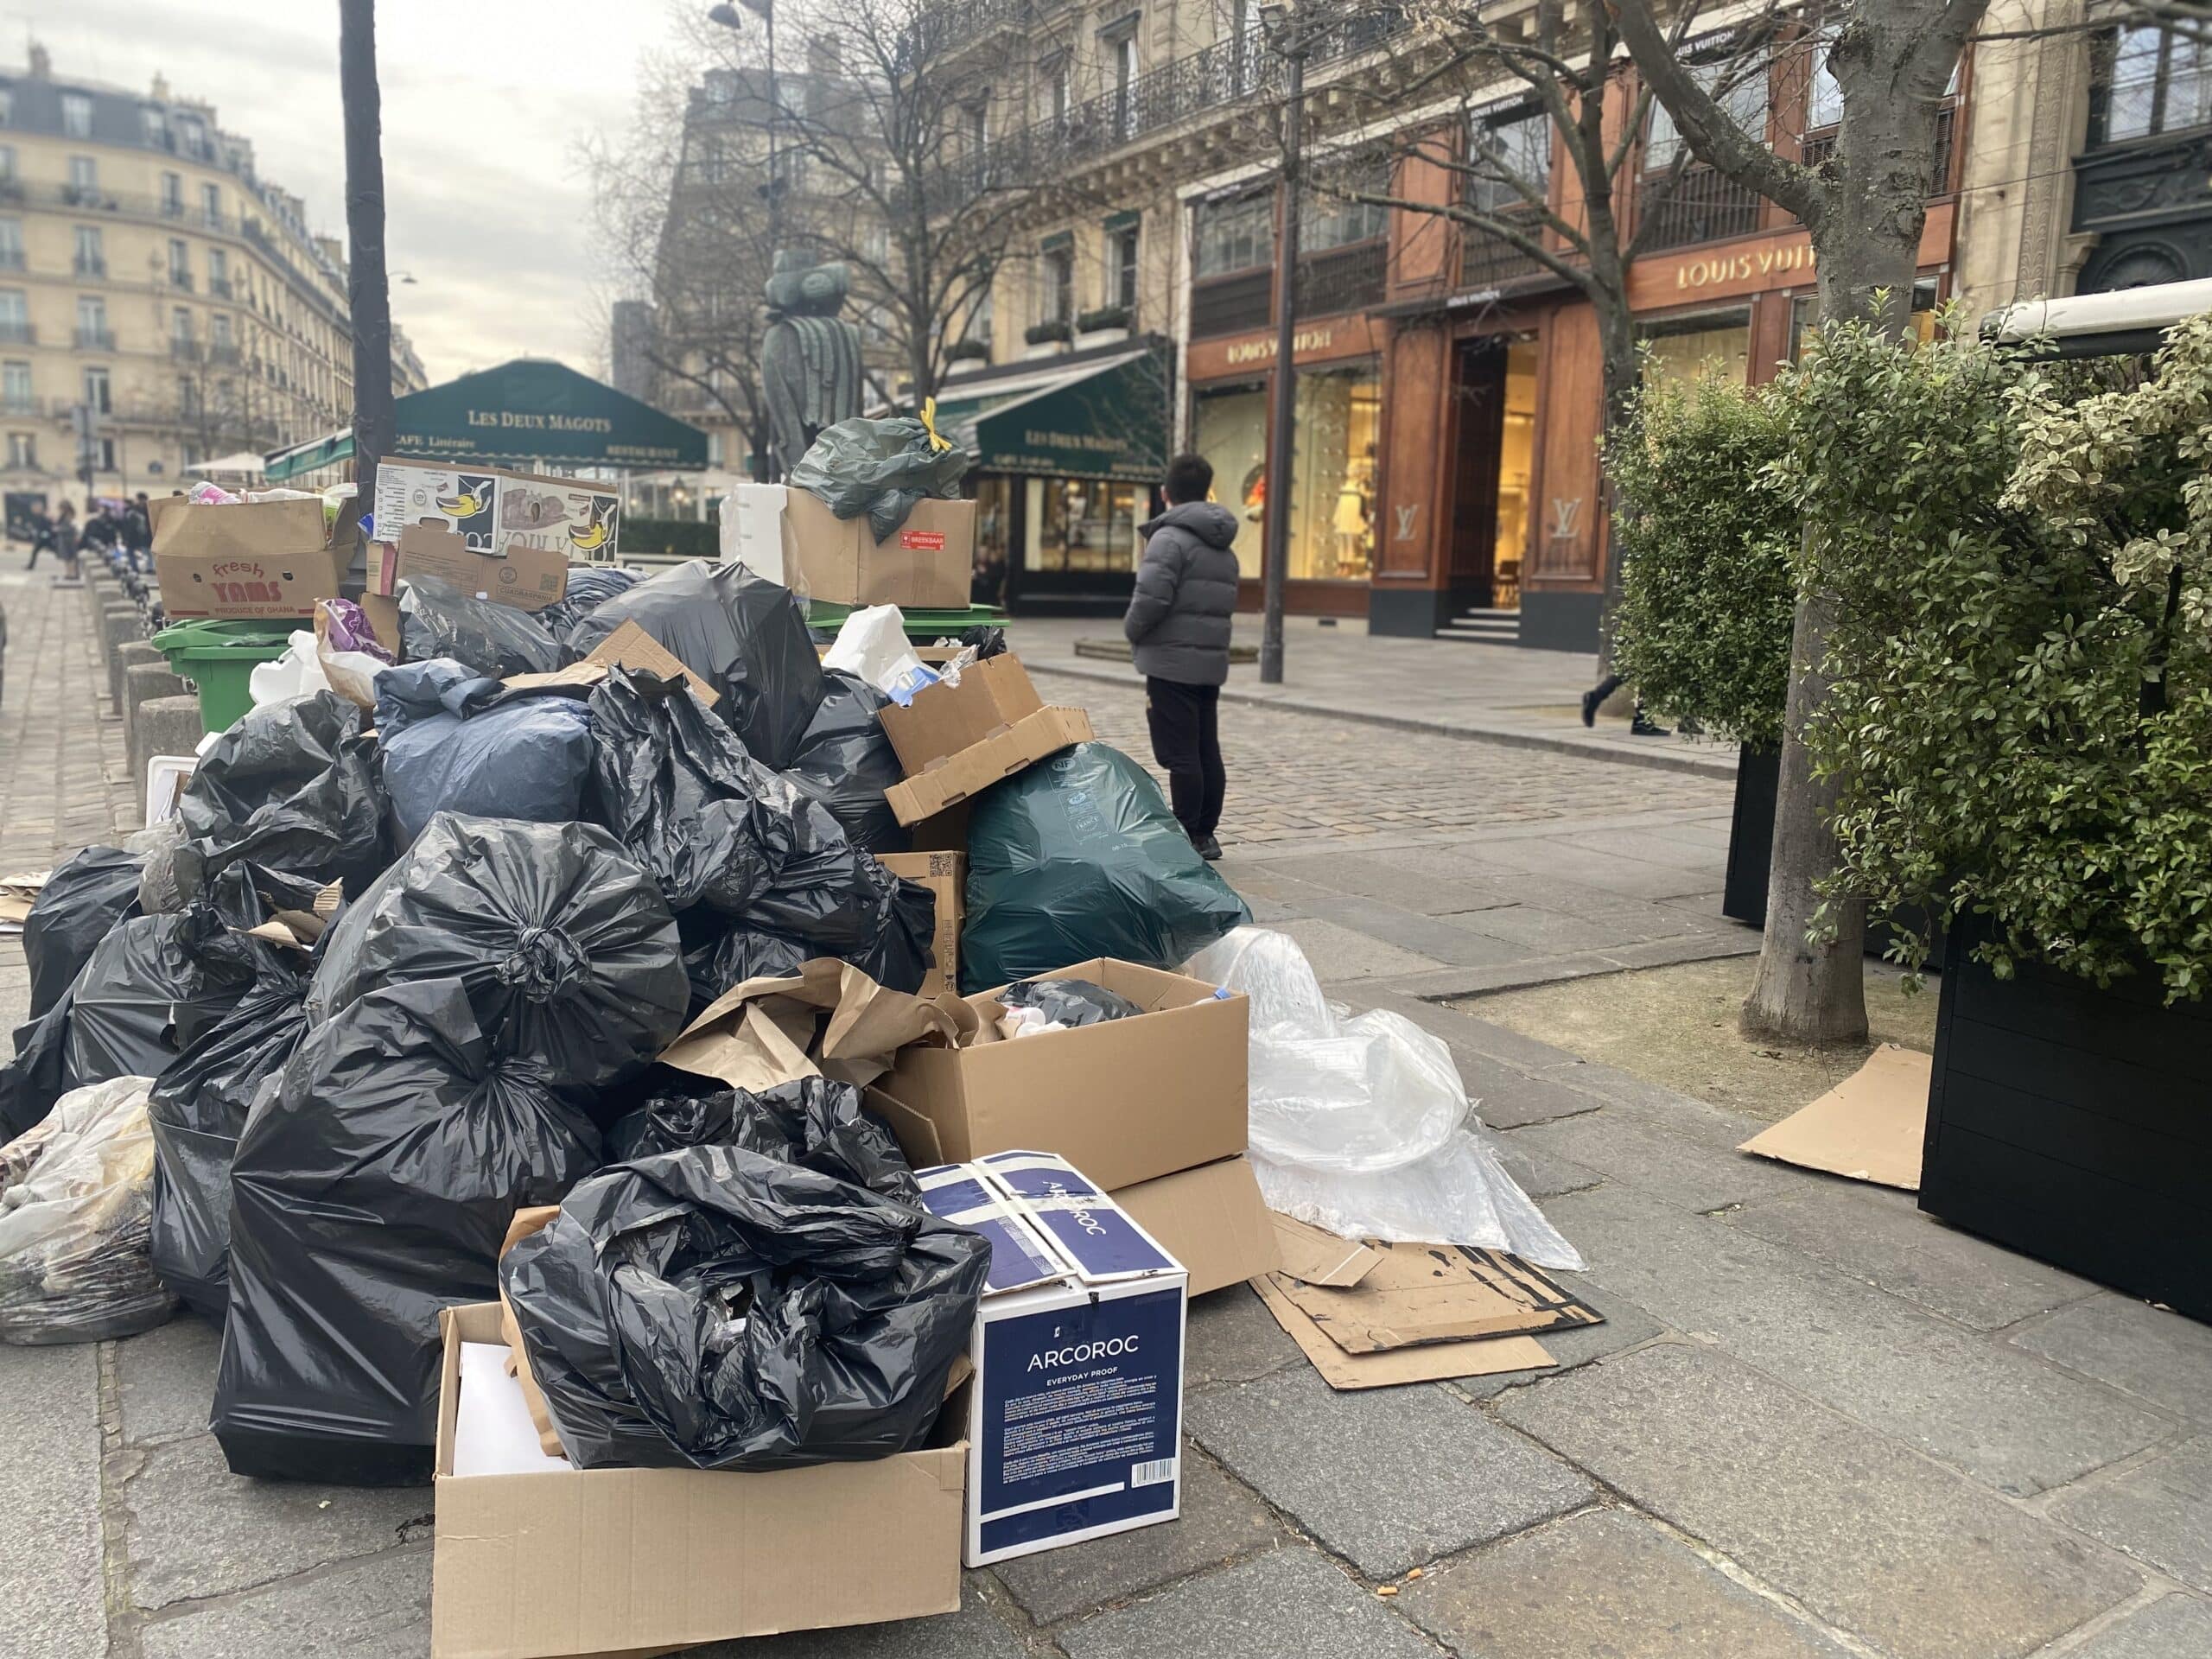 Piles of trash in front of a Louis Vuitton luxury store.